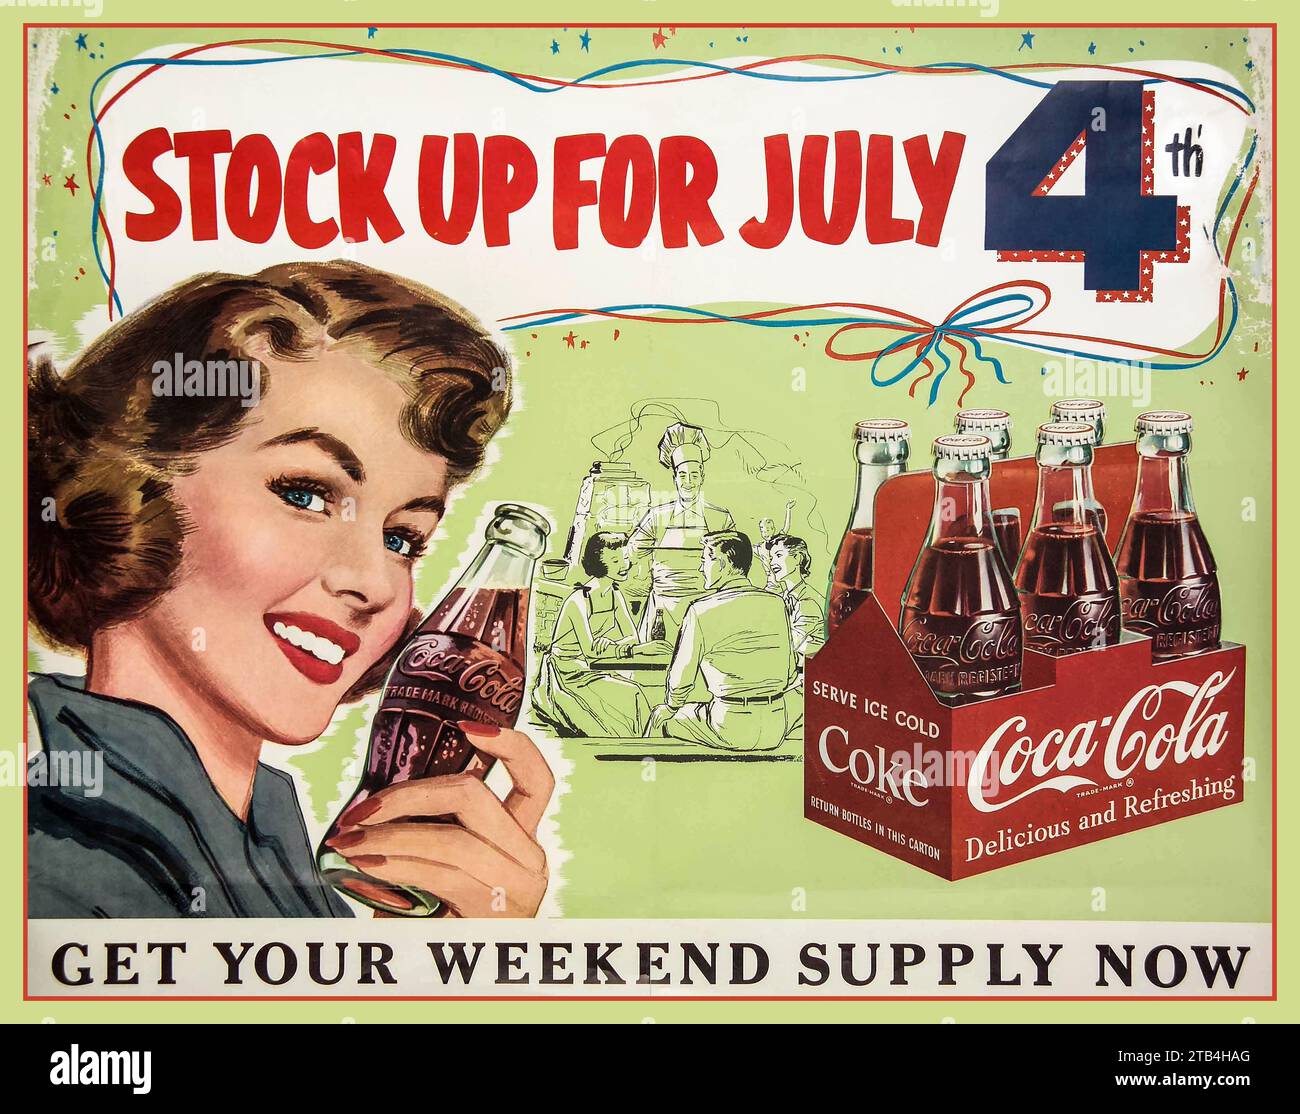 https://c8.alamy.com/comp/2TB4HAG/vintage-1940s-coca-cola-advertisement-poster-stock-up-for-july-4th-get-your-weekend-supply-now-federal-usa-holiday-celebrating-indepenence-day-illustration-advertisement-america-americana-usa-2TB4HAG.jpg